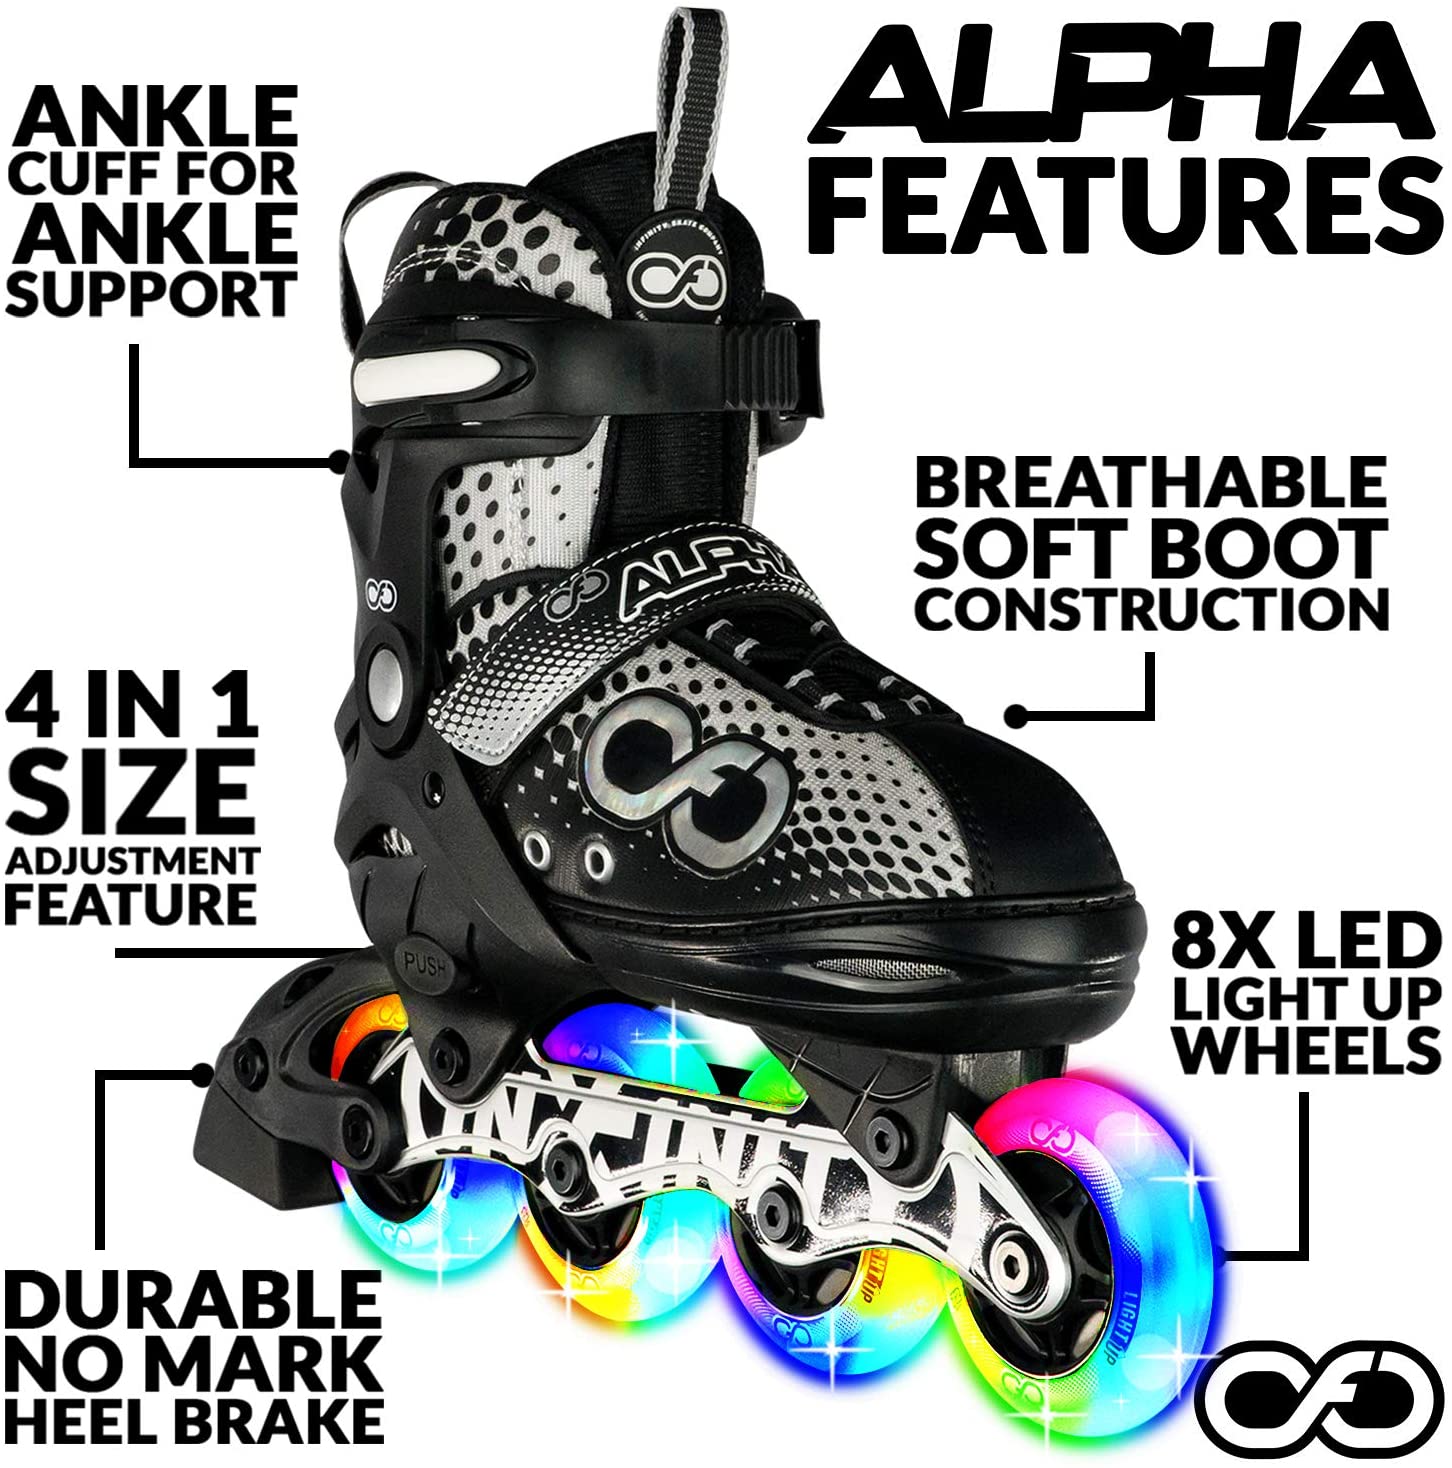 Available in Four Colors Crazy Skates Adjustable Inline Skates with Light Up Wheels 